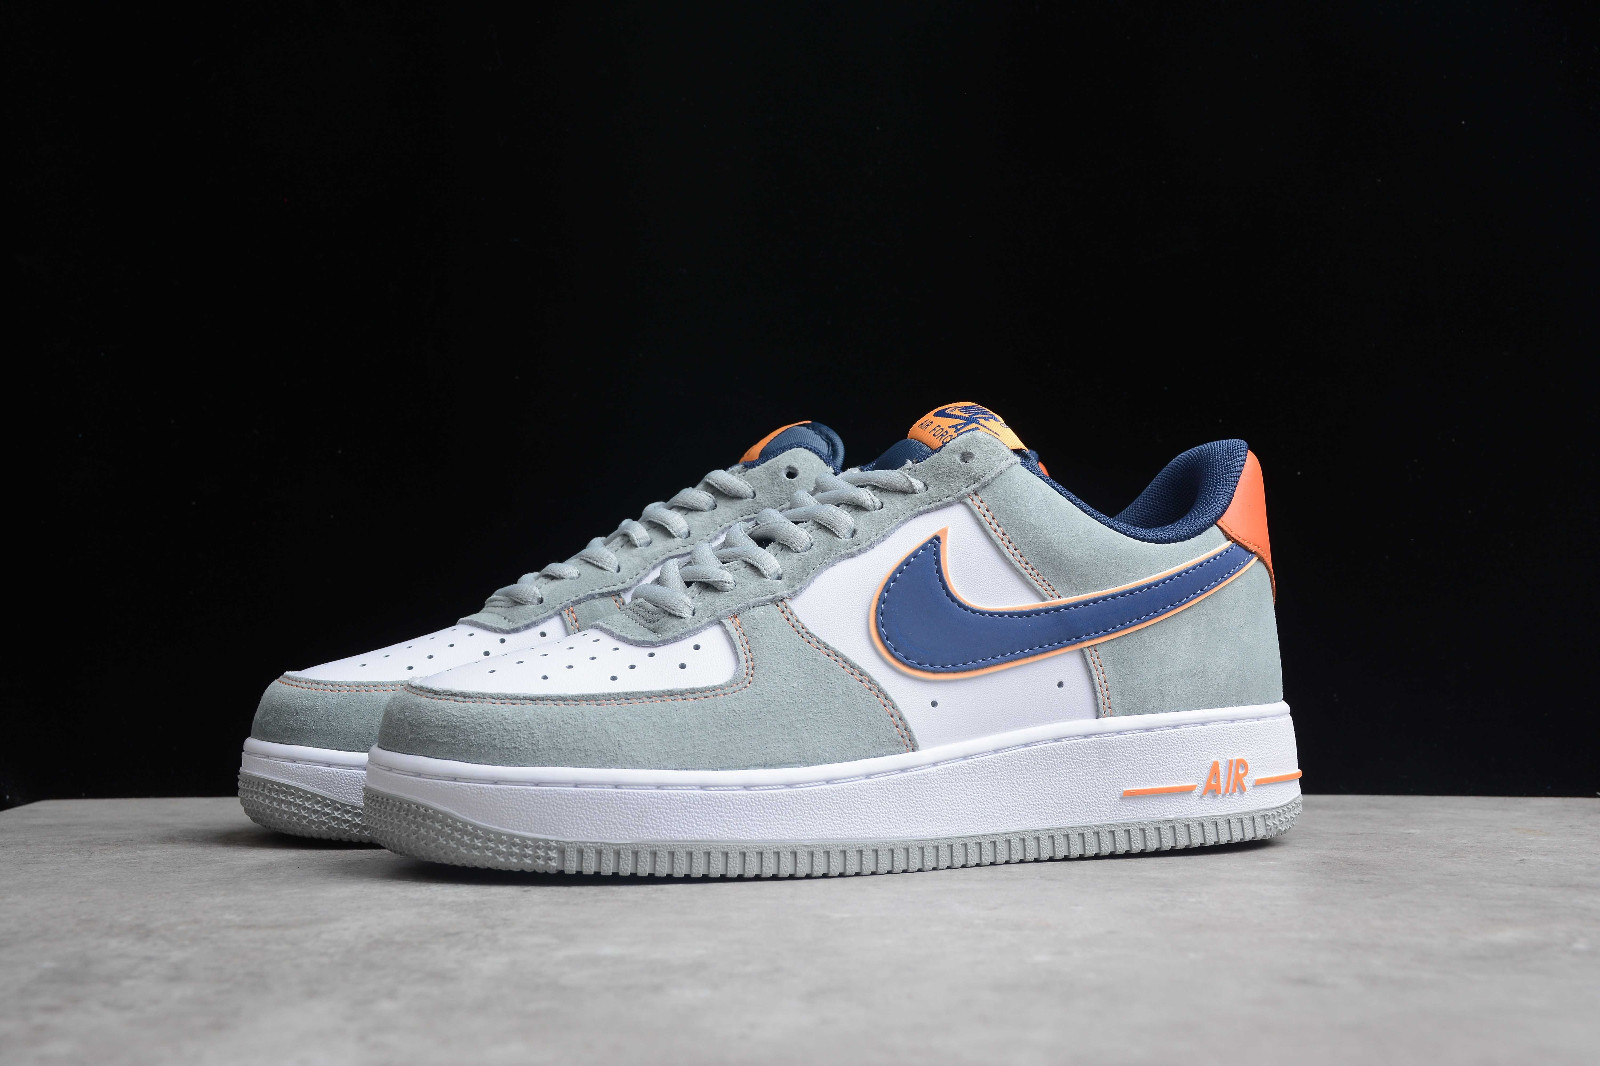 zuur Voorzieningen absorptie Nike Air Force 1 07 Low White Cool Grey Navy Blue Orange CQ5059 -  StclaircomoShops - nike air max 2002 laceless boots black screen - 103